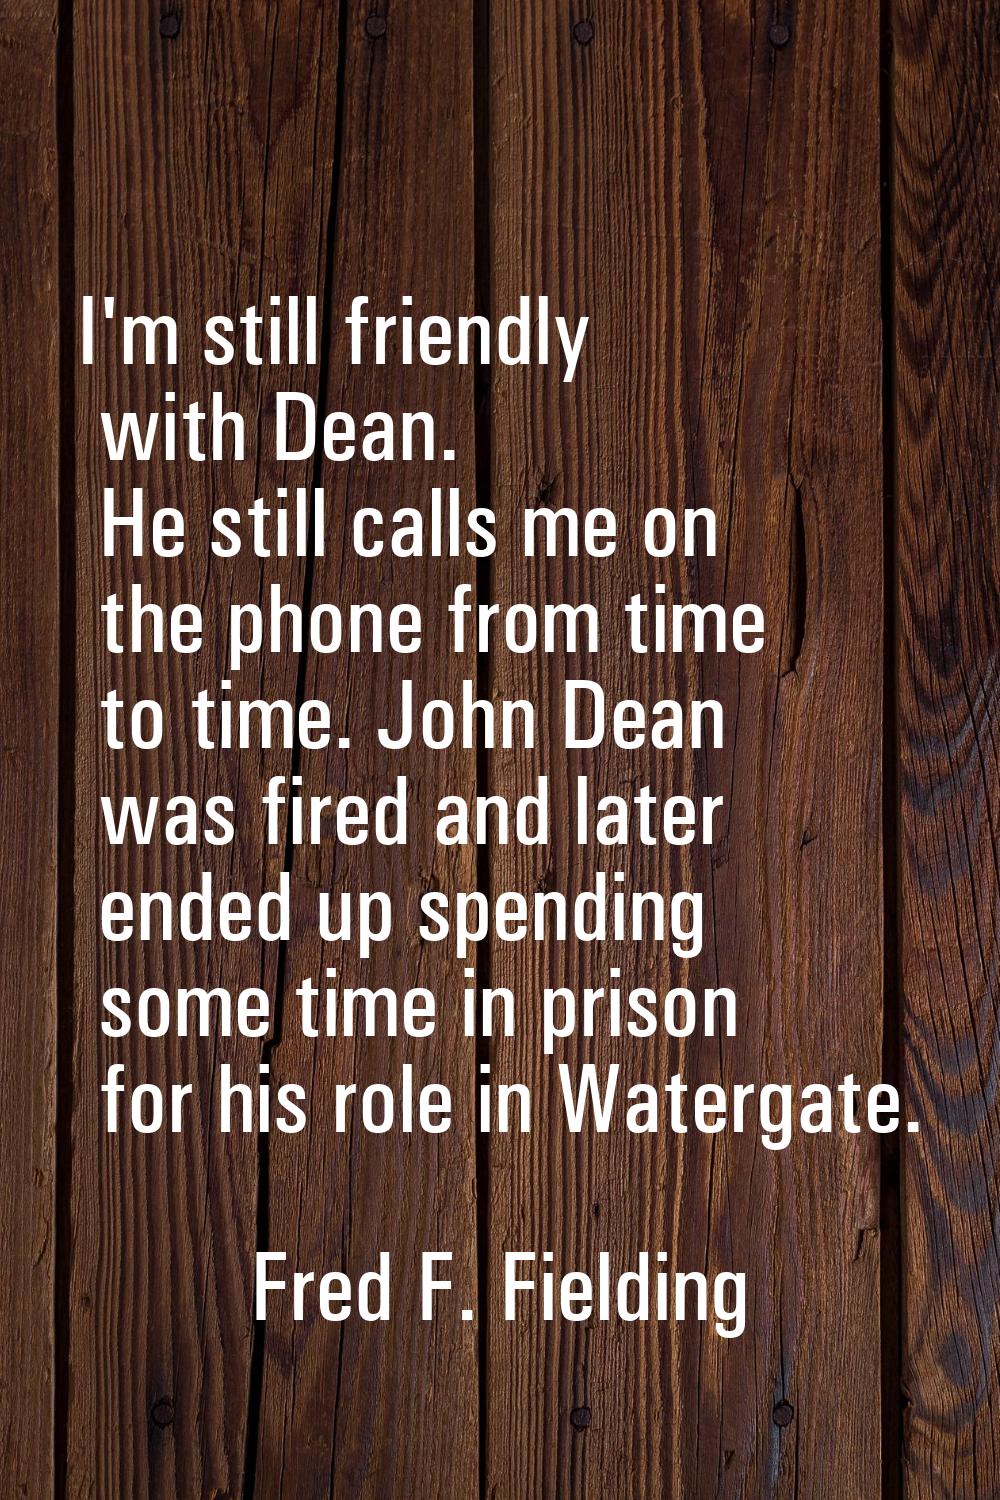 I'm still friendly with Dean. He still calls me on the phone from time to time. John Dean was fired